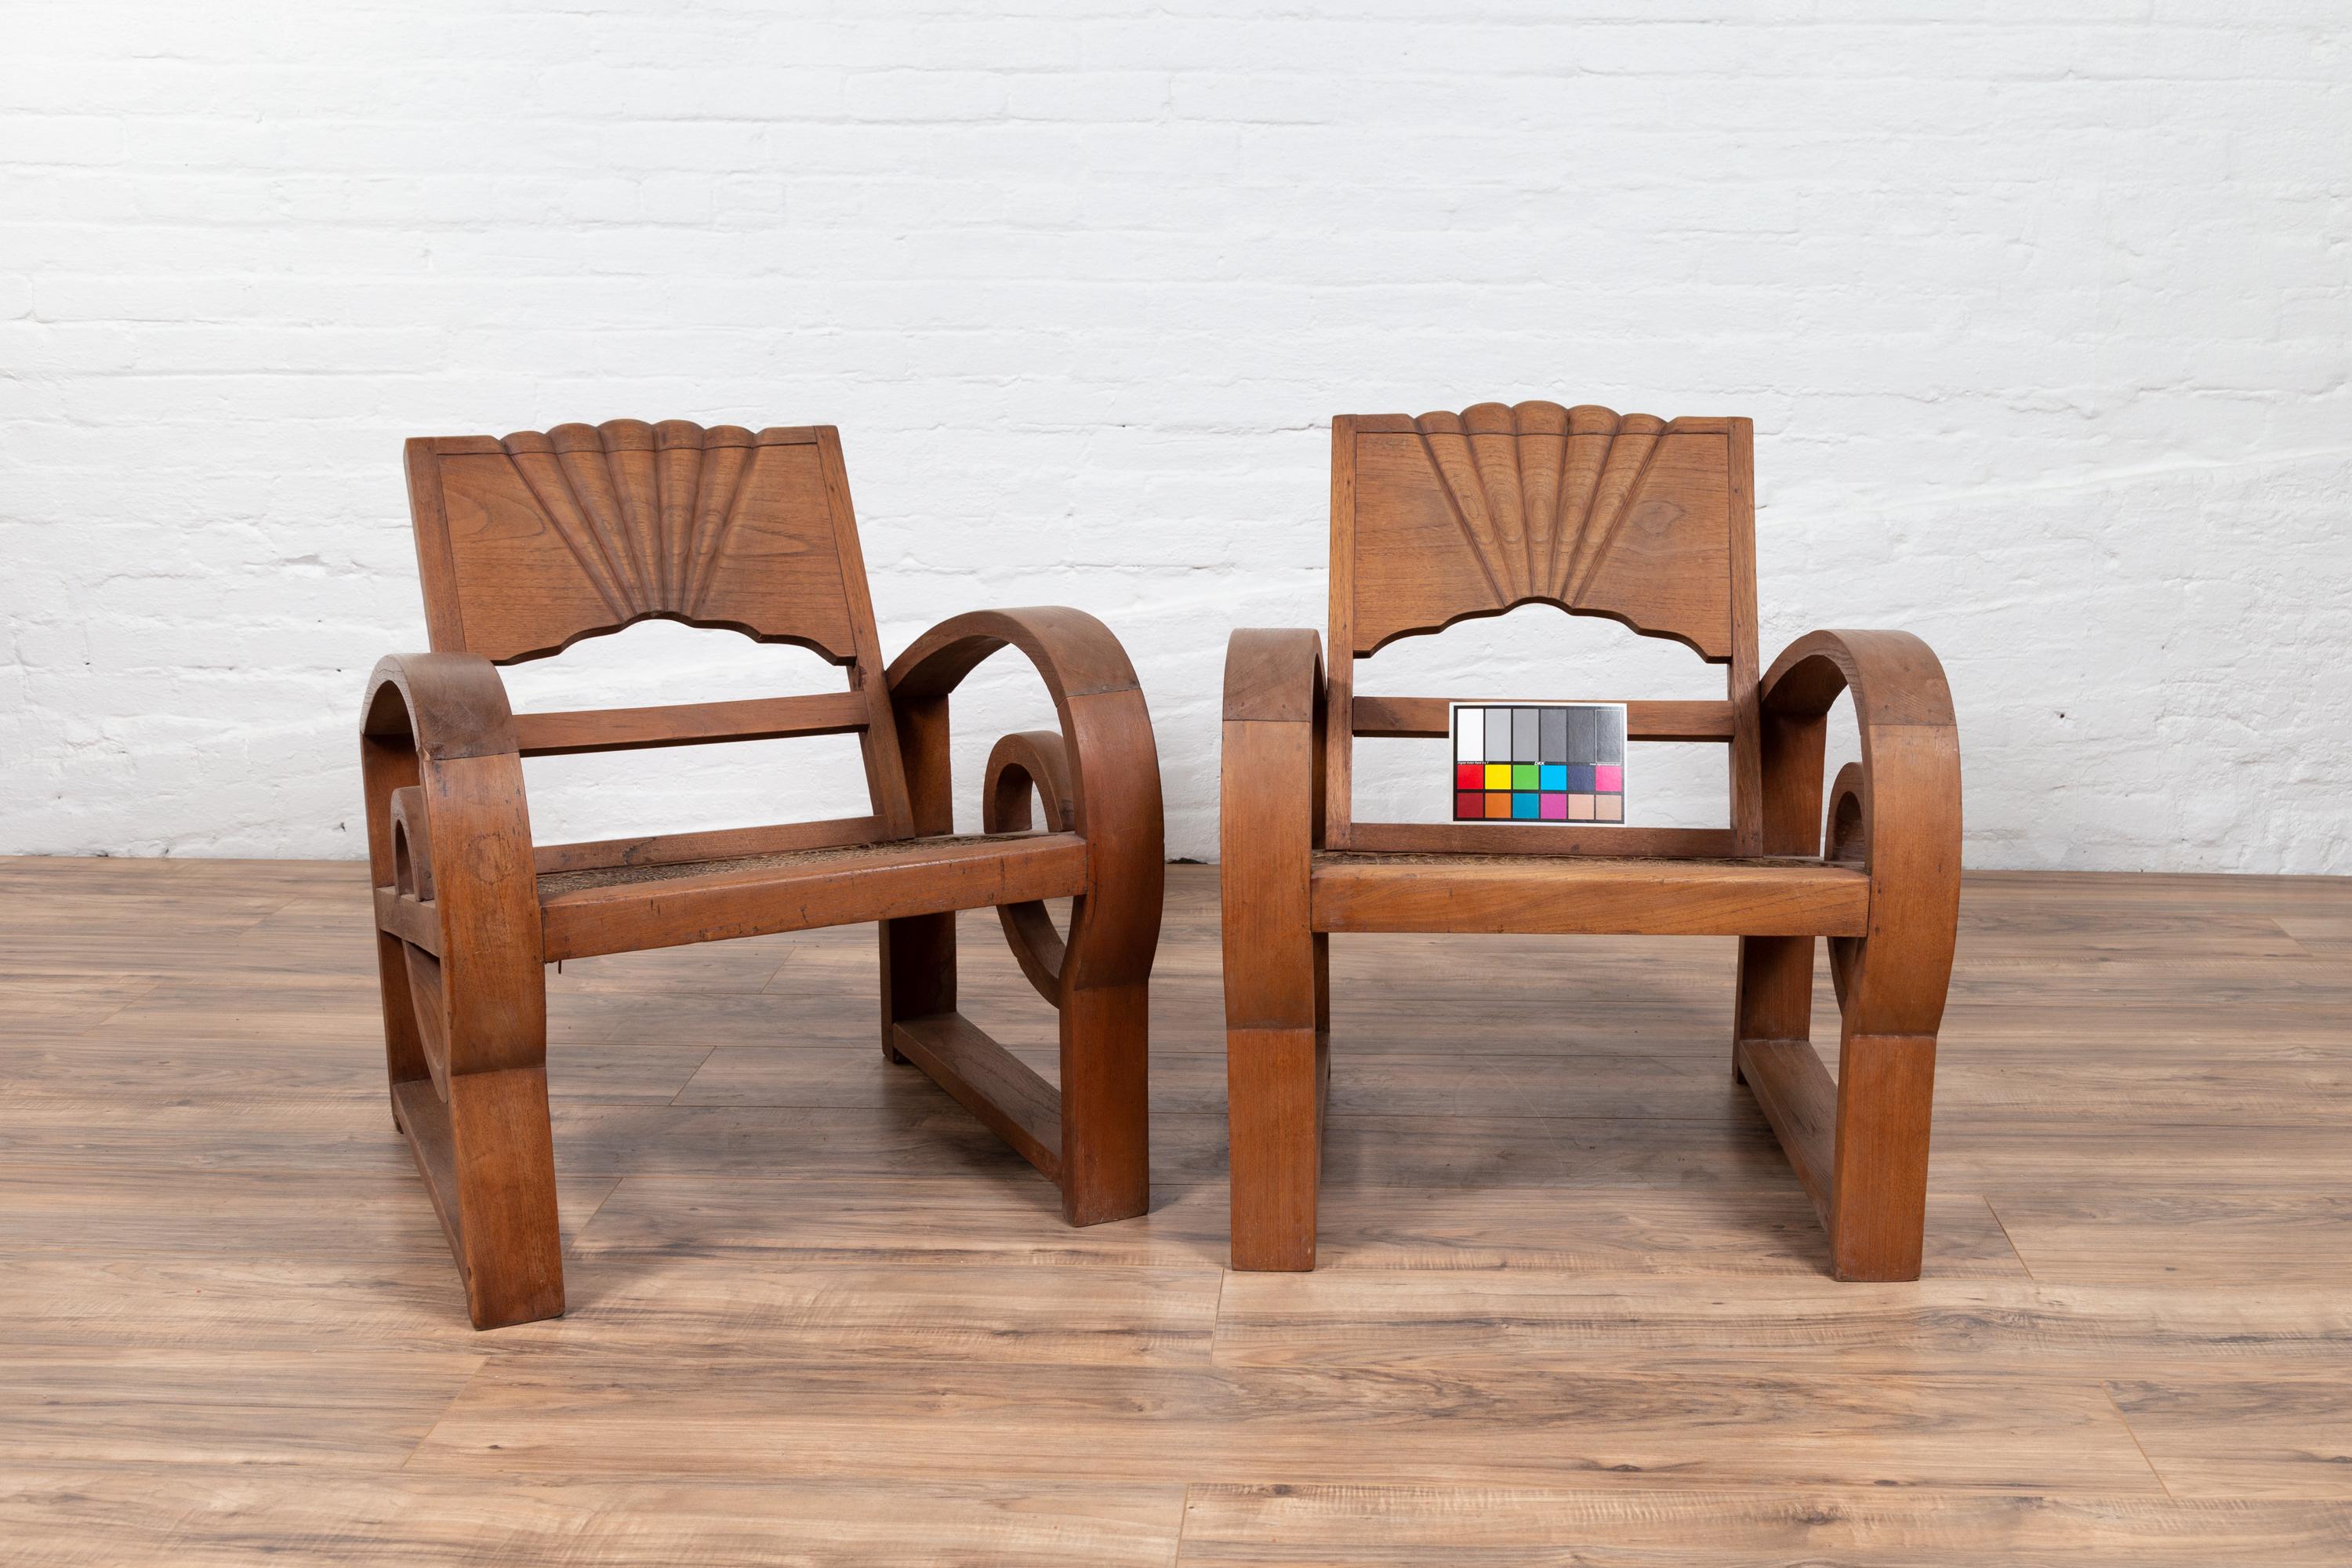 Pair of Teak Wood Country Chairs from Madura with Rattan Seats and Looping Arms 10